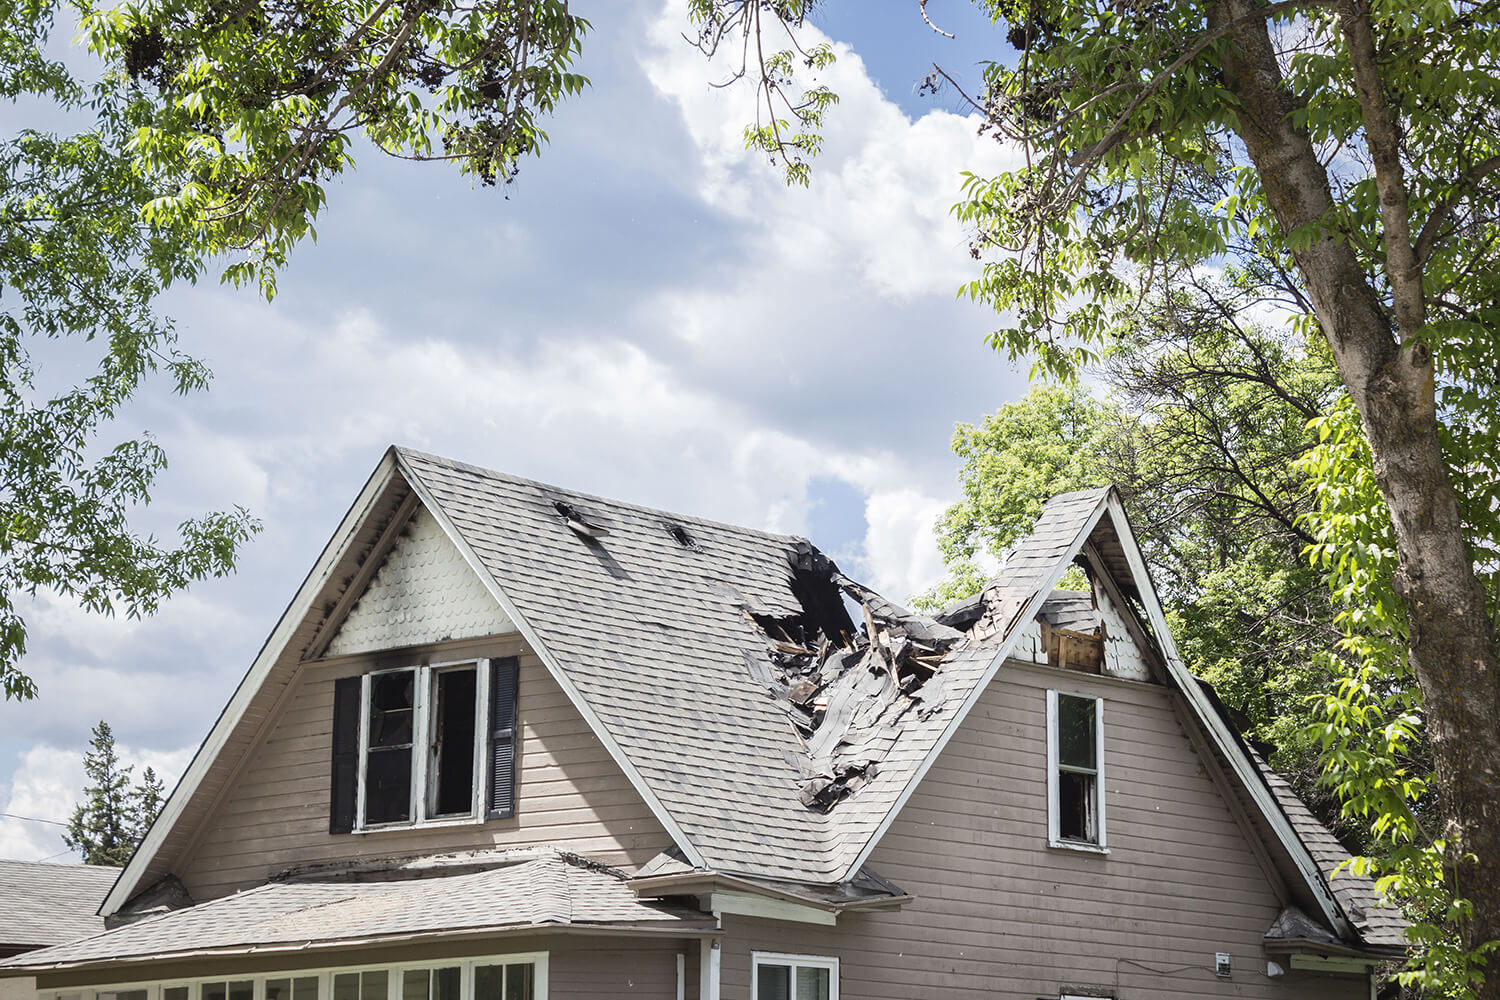 How to File a Homeowners Insurance Claim